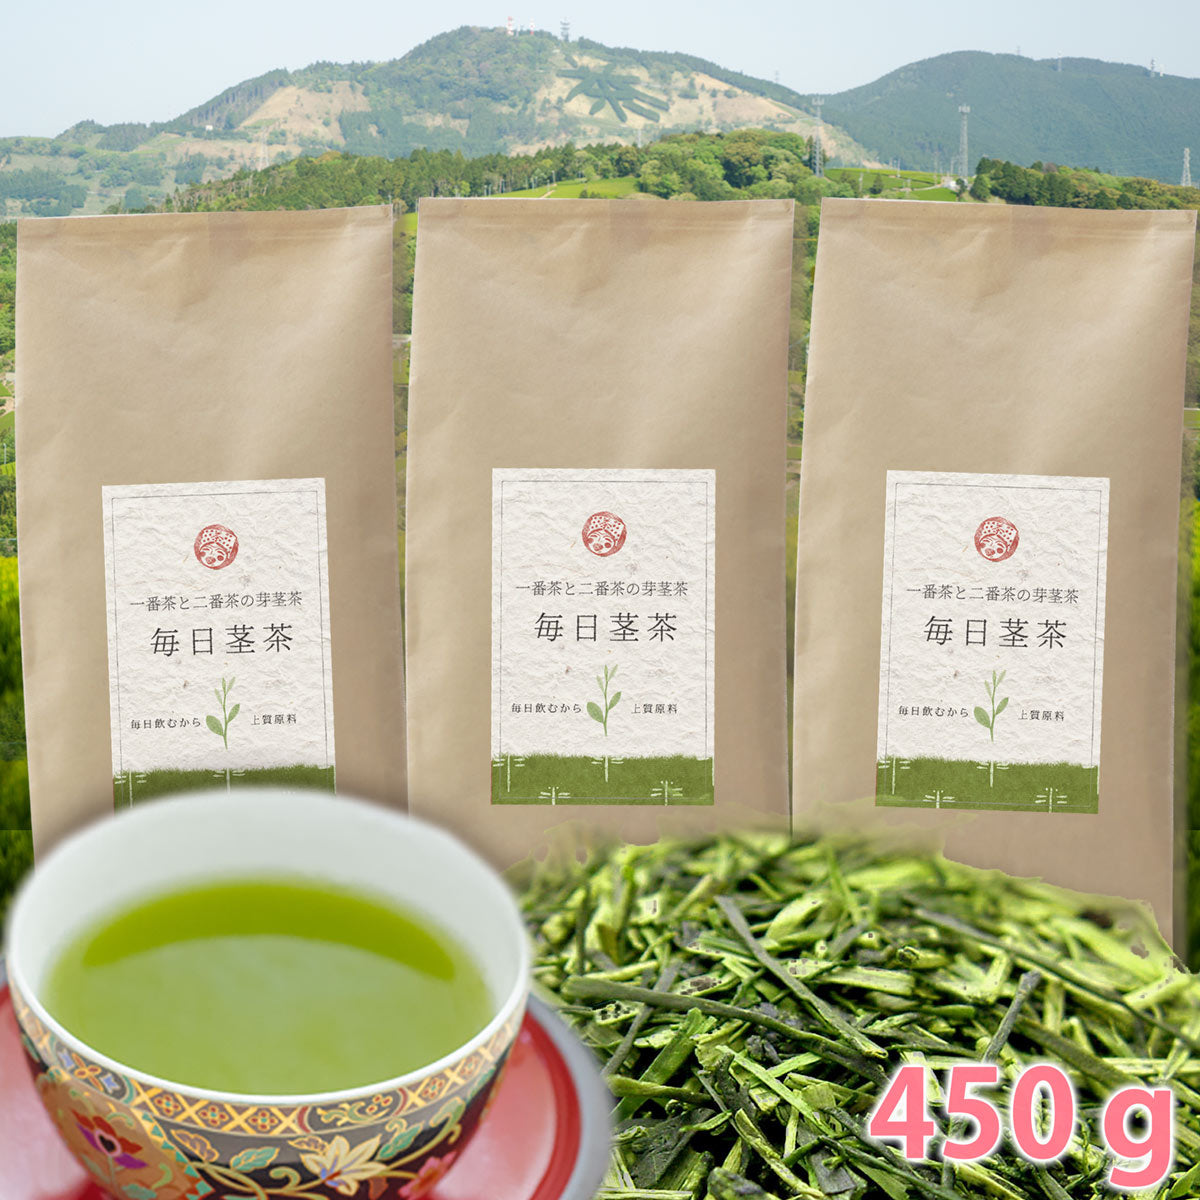 I made too much, so I divided it up and added 100g of Ichibancha sprout tea x 3 bottles! Free shipping for a total of 400g!